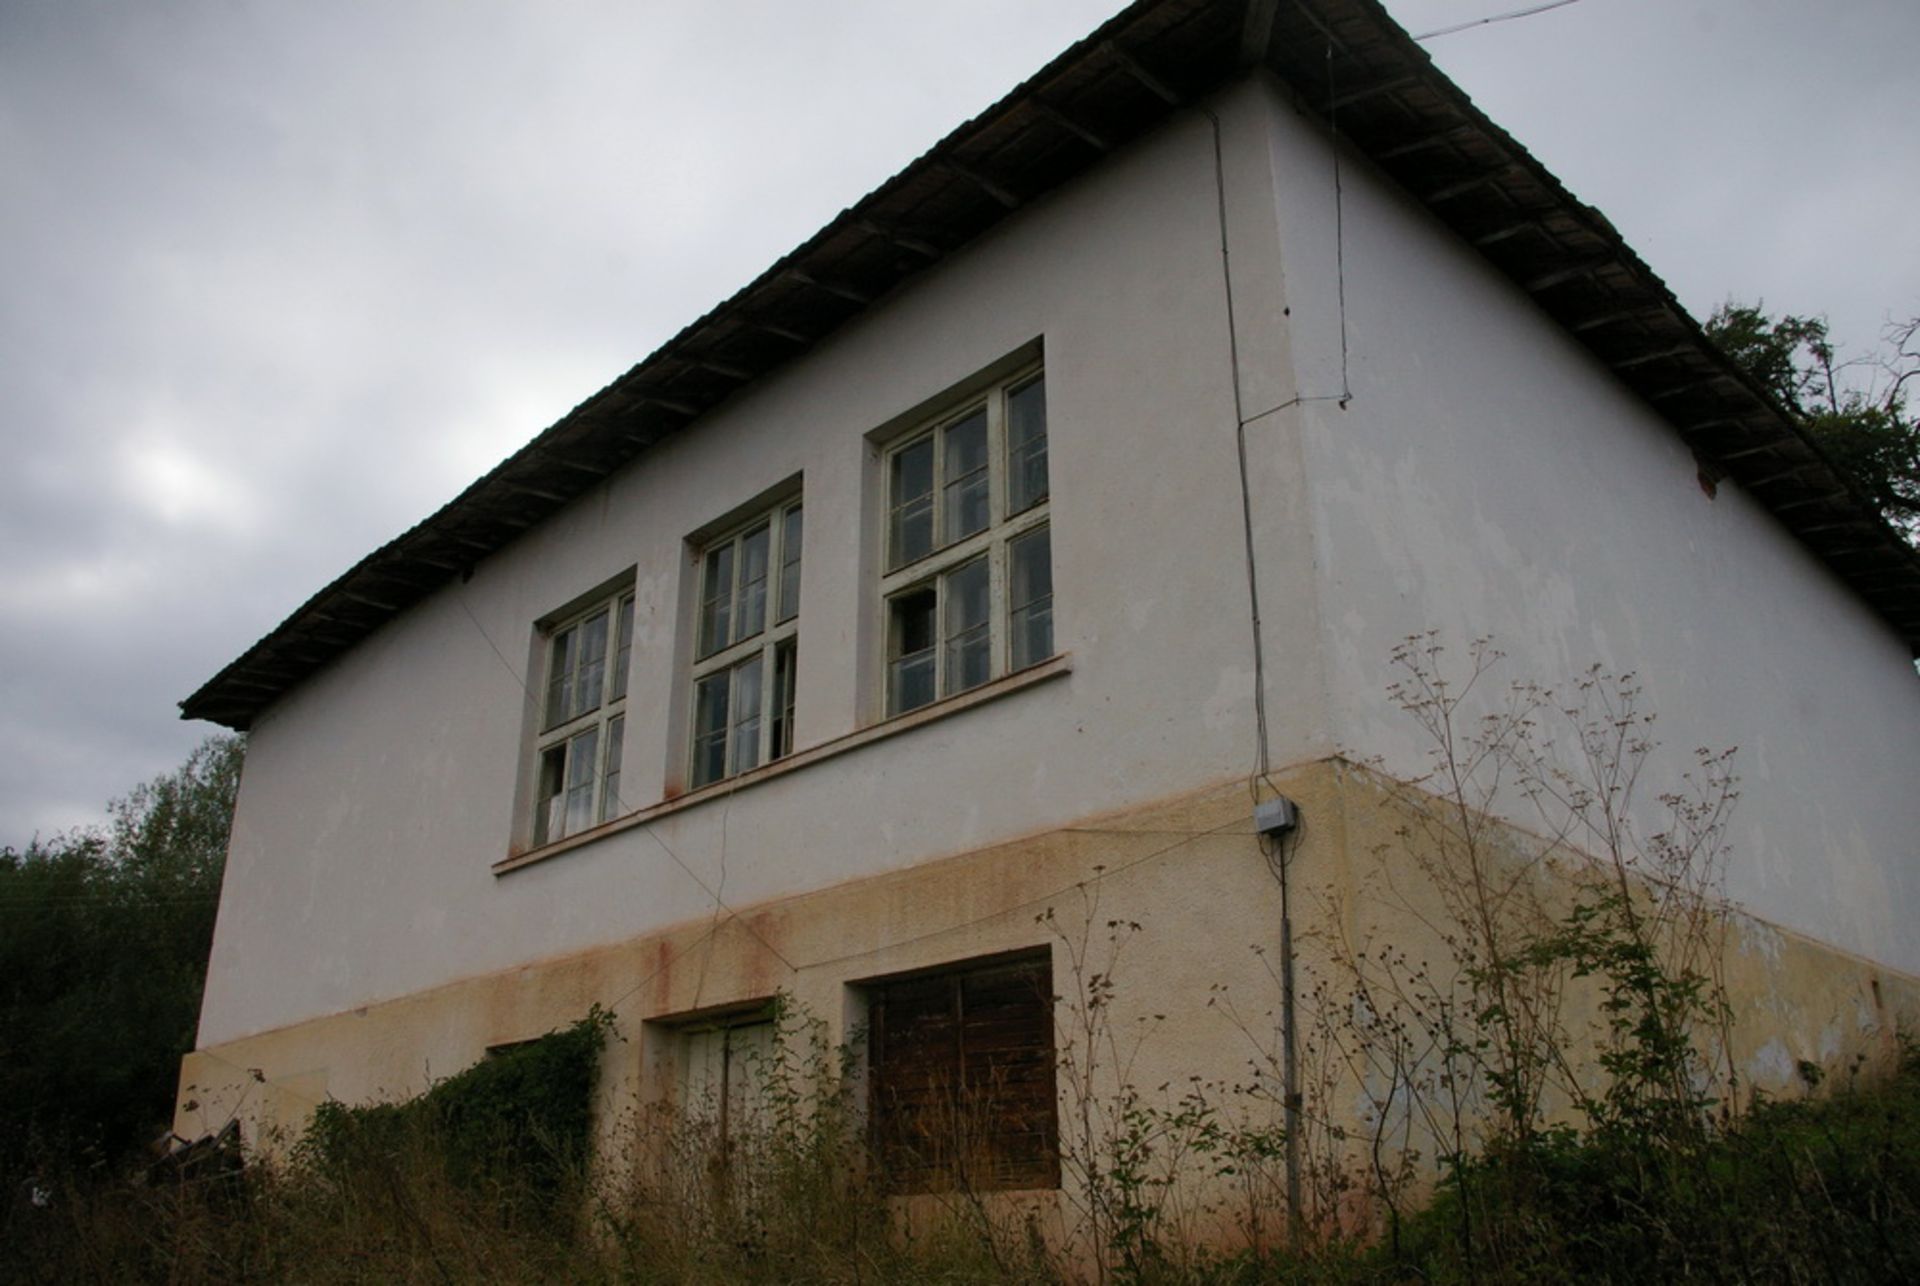 BD - Former state school with mountain views - one hour to the capital, Sofia + 2,000 sqm land - Image 8 of 17